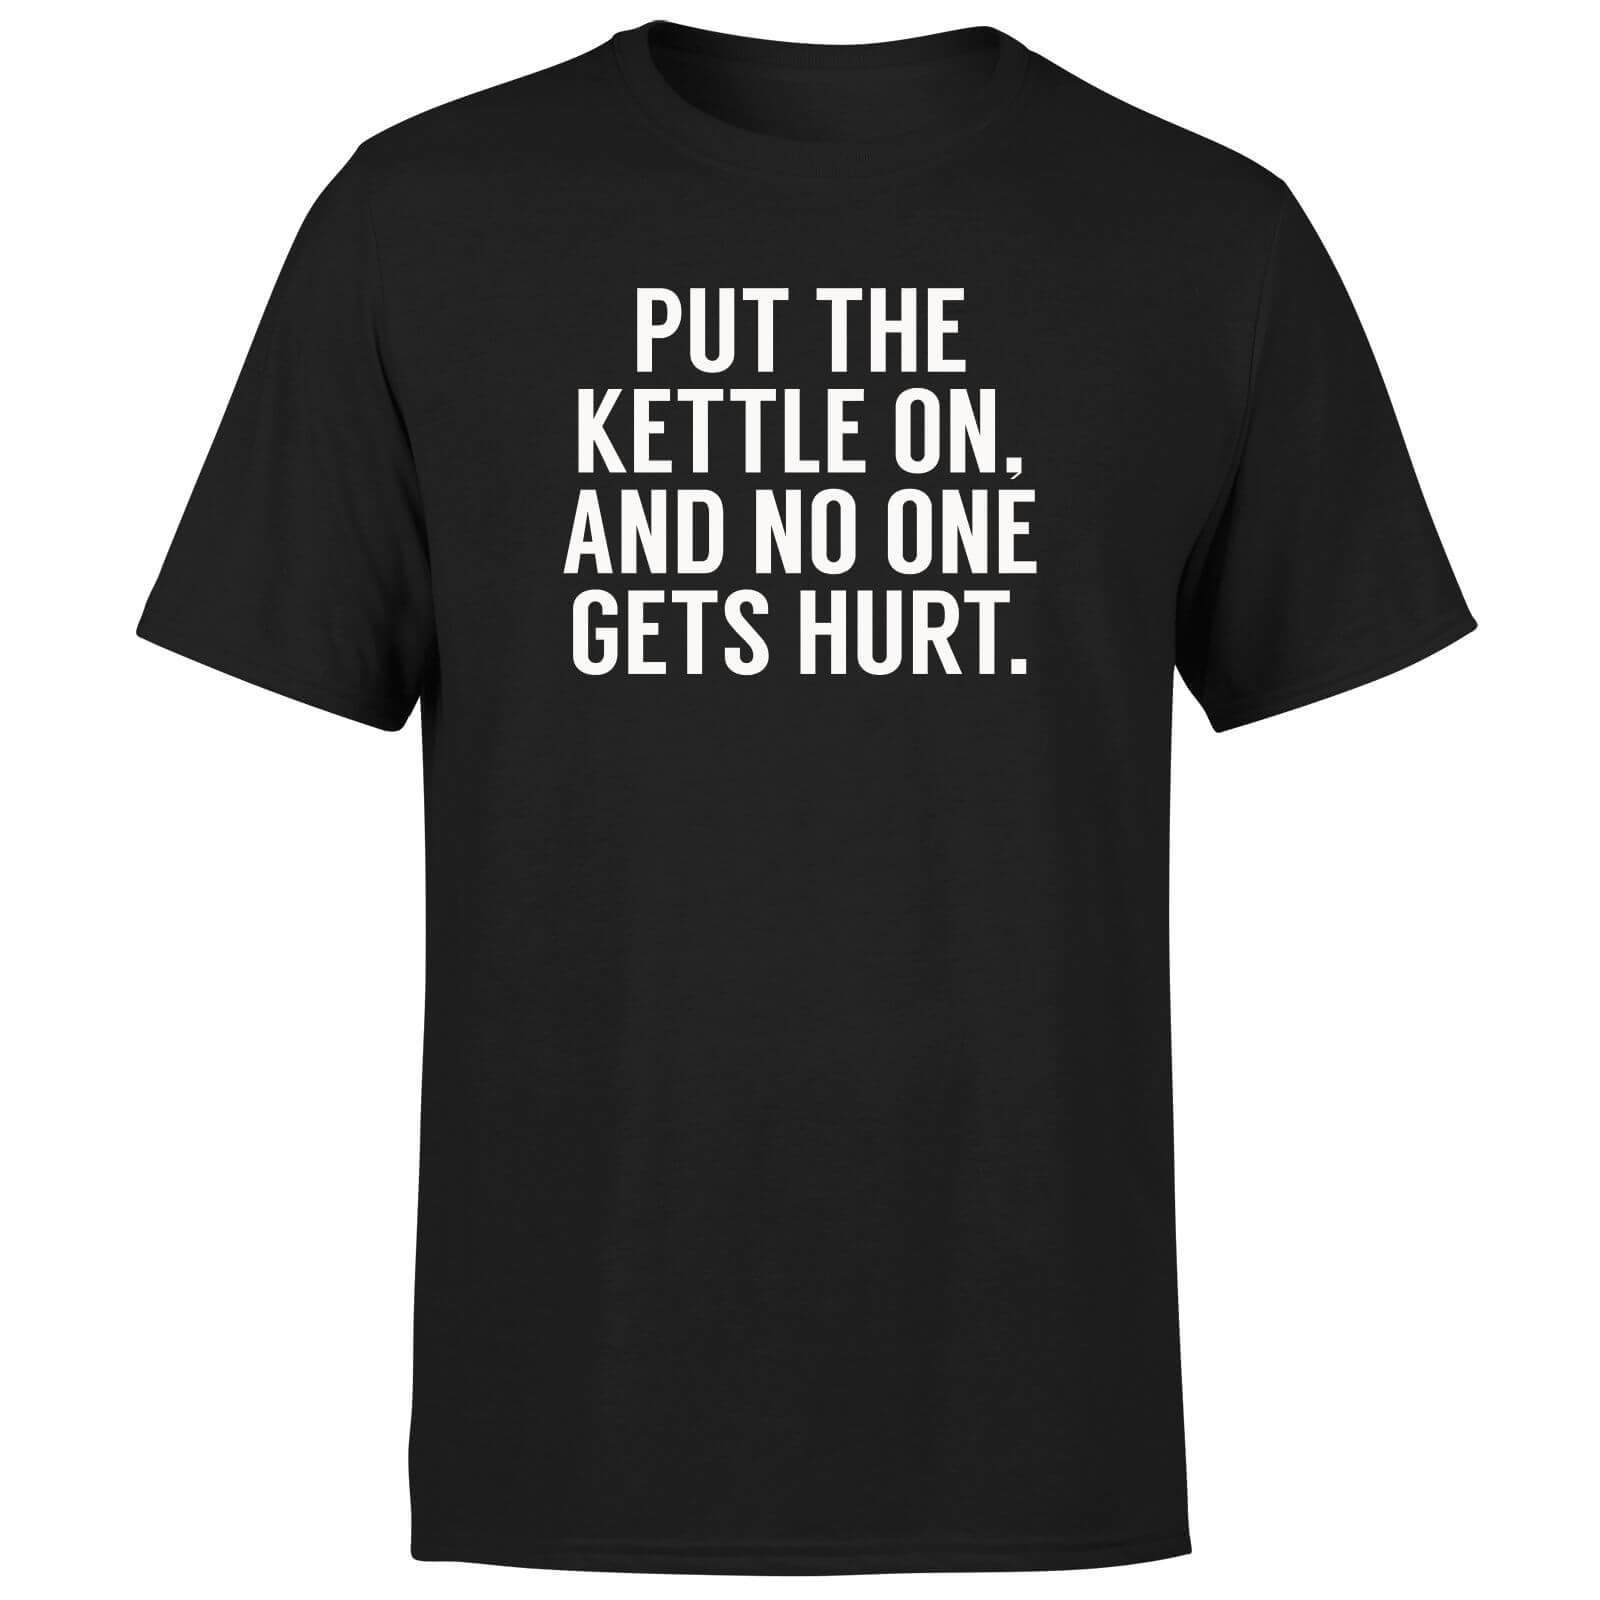 Put the Kettle on and No One Gets Hurt T-Shirt - Black - S - Black